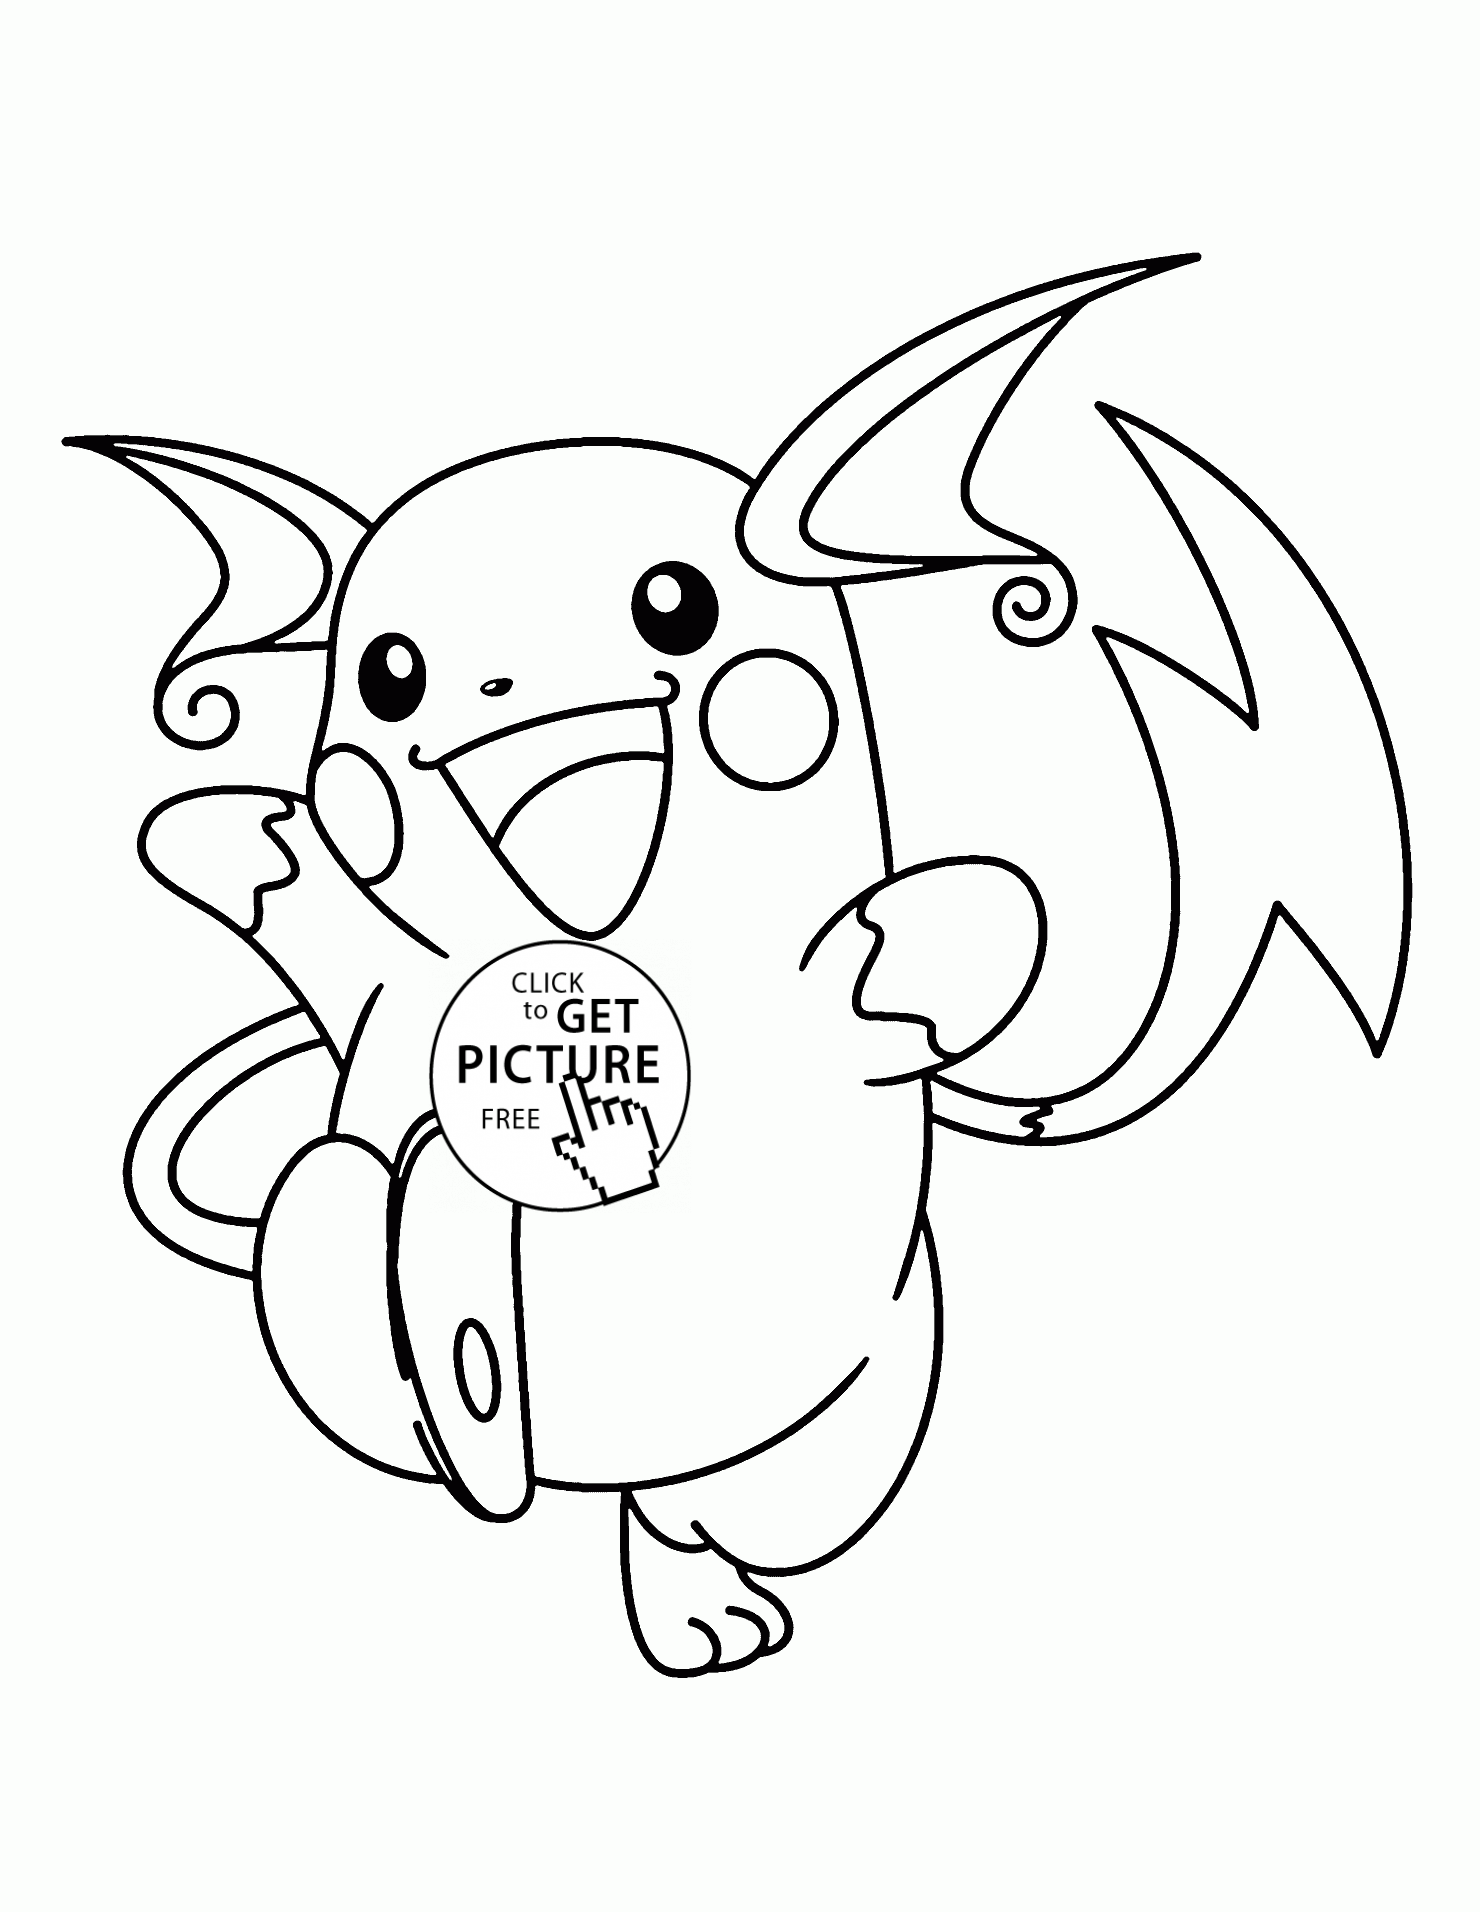 download-and-share-clipart-about-pikachu-clipart-black-and-white